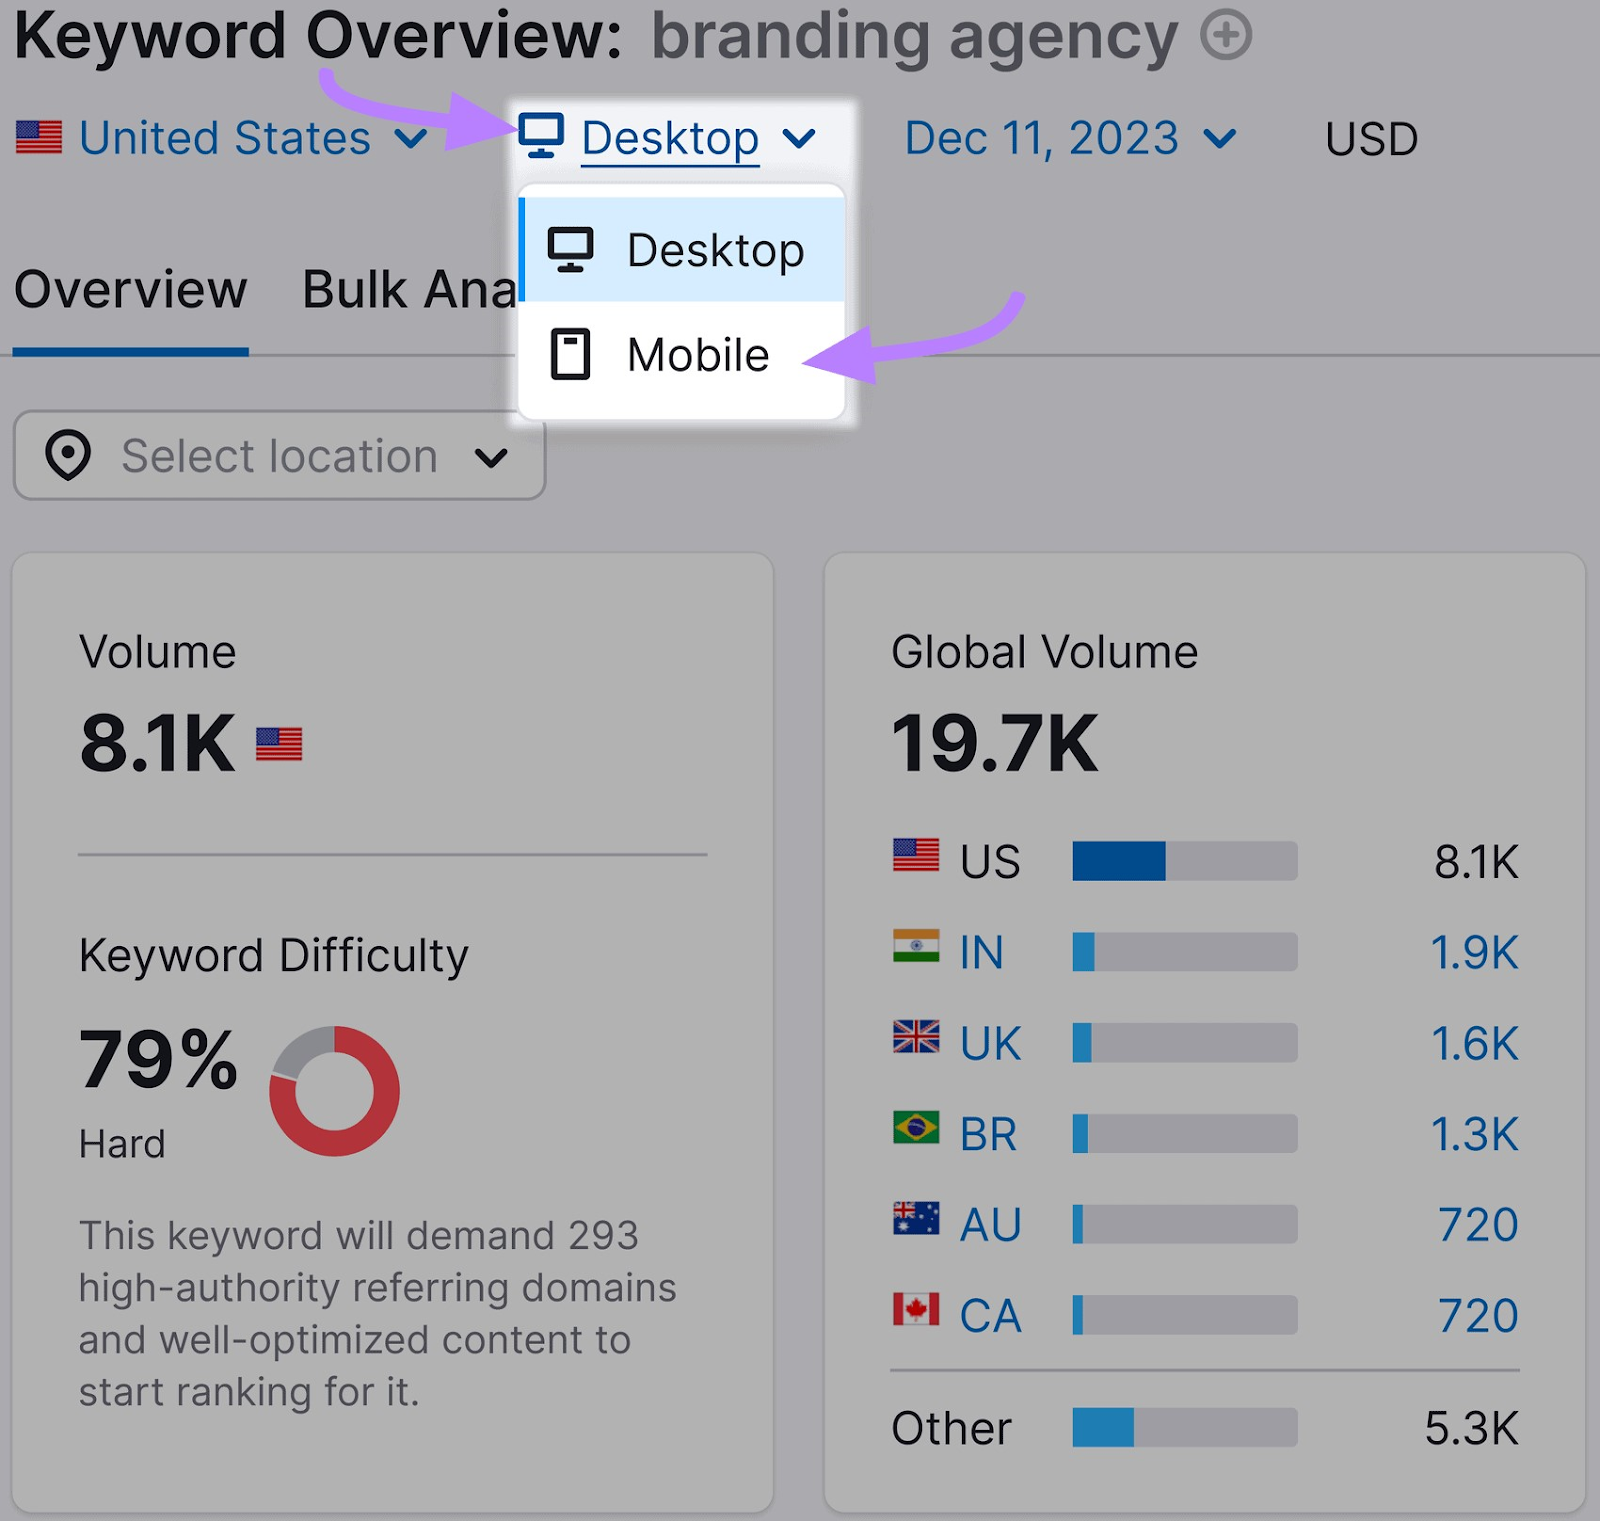 Change the Keyword Overview tool report to "Mobile"